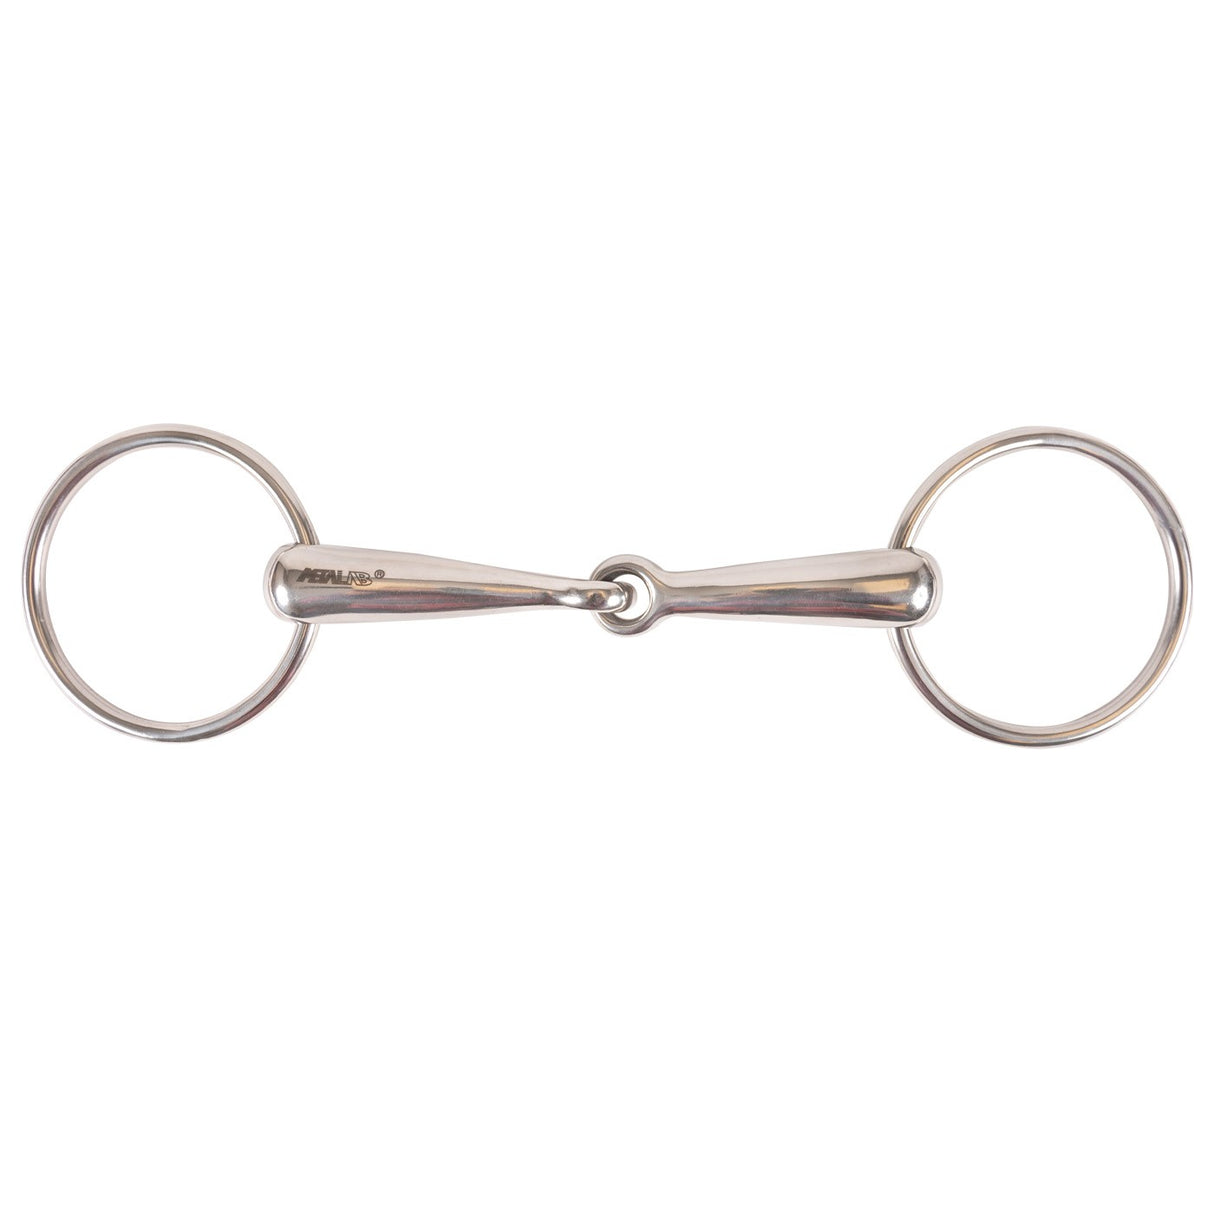 Metalab Loose Ring Solid Mouth Snaffle Bit